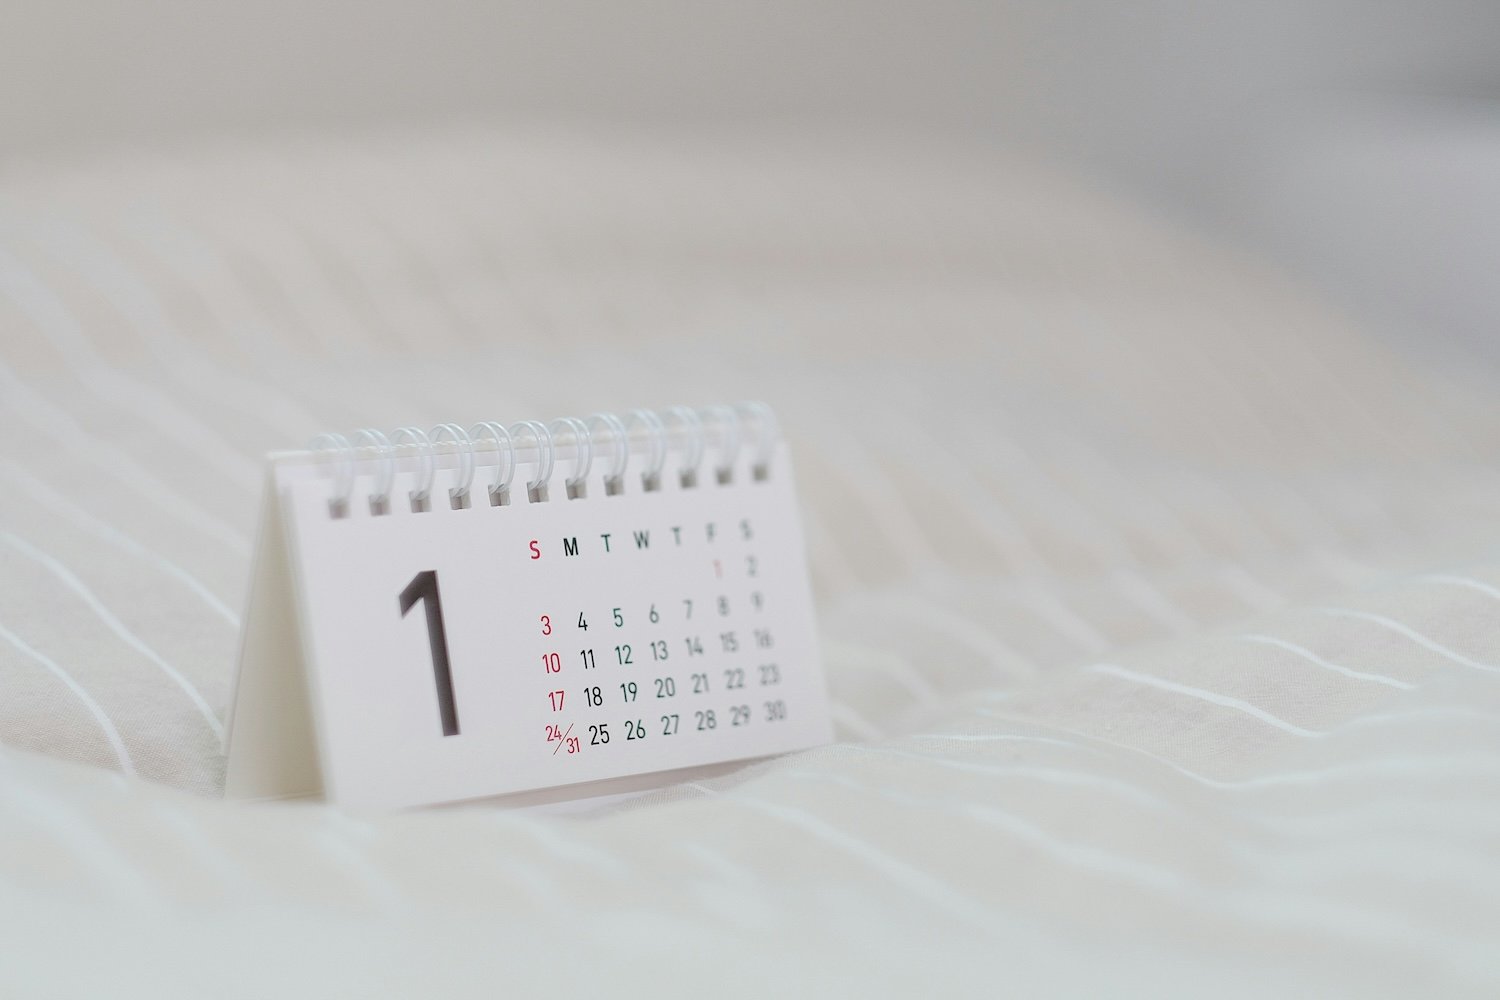 JavaScript Date Objects: Saving Dates in Different Timezones